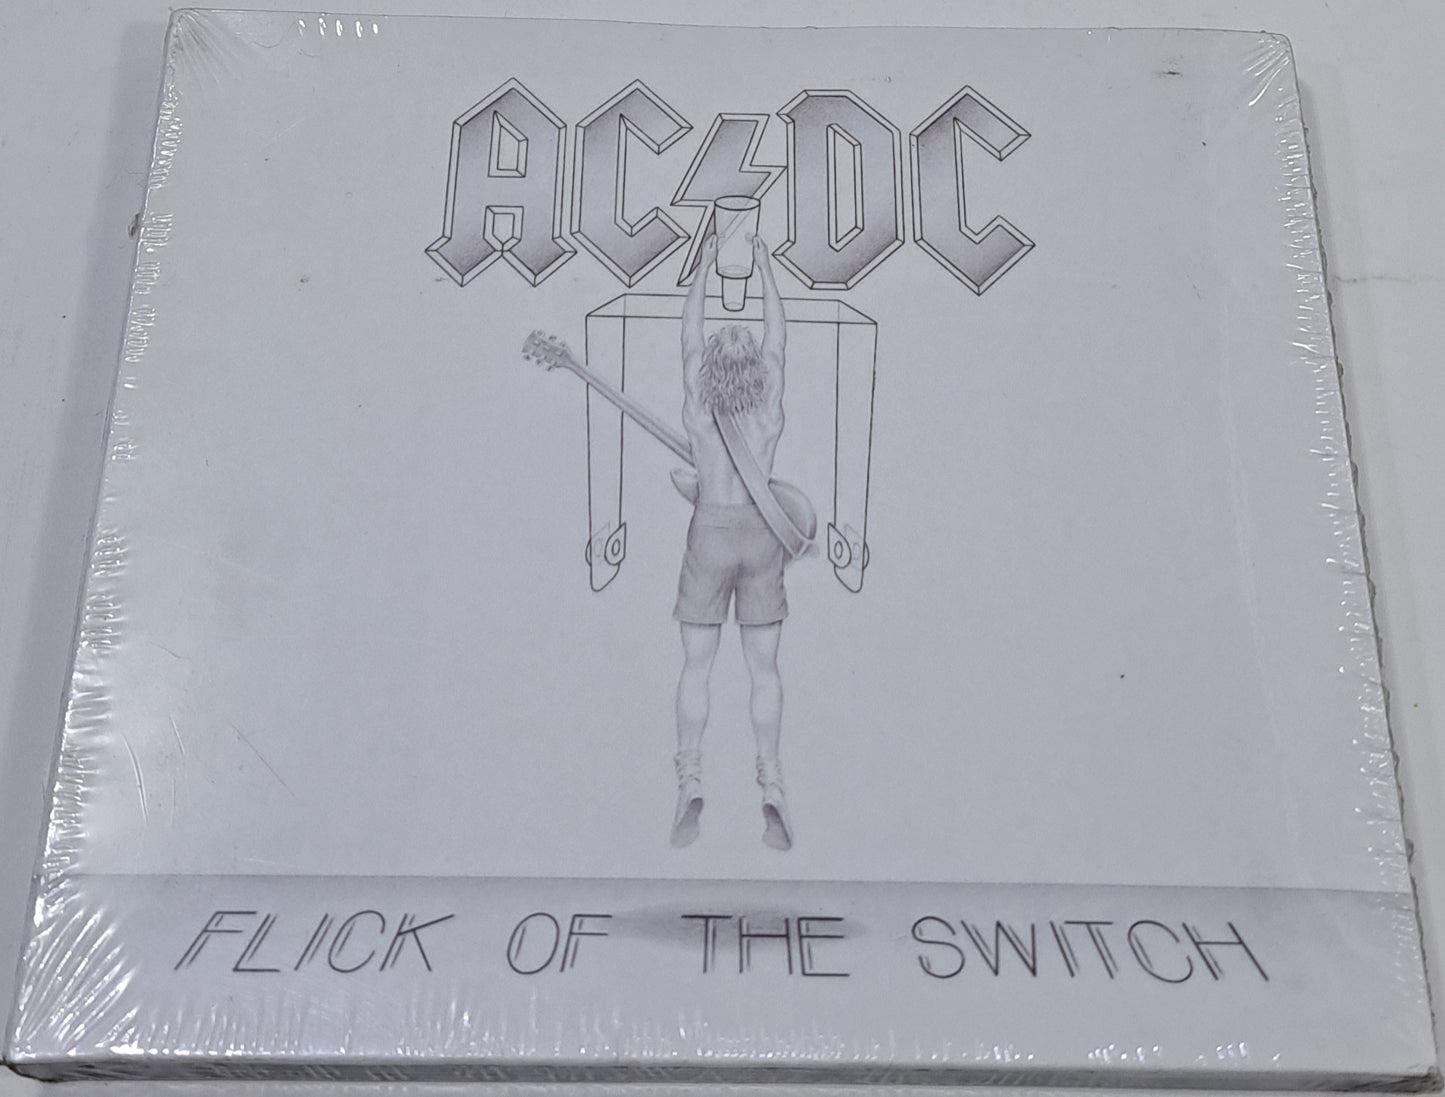 AC/DC - FLICK OF THE SWITCH  CD